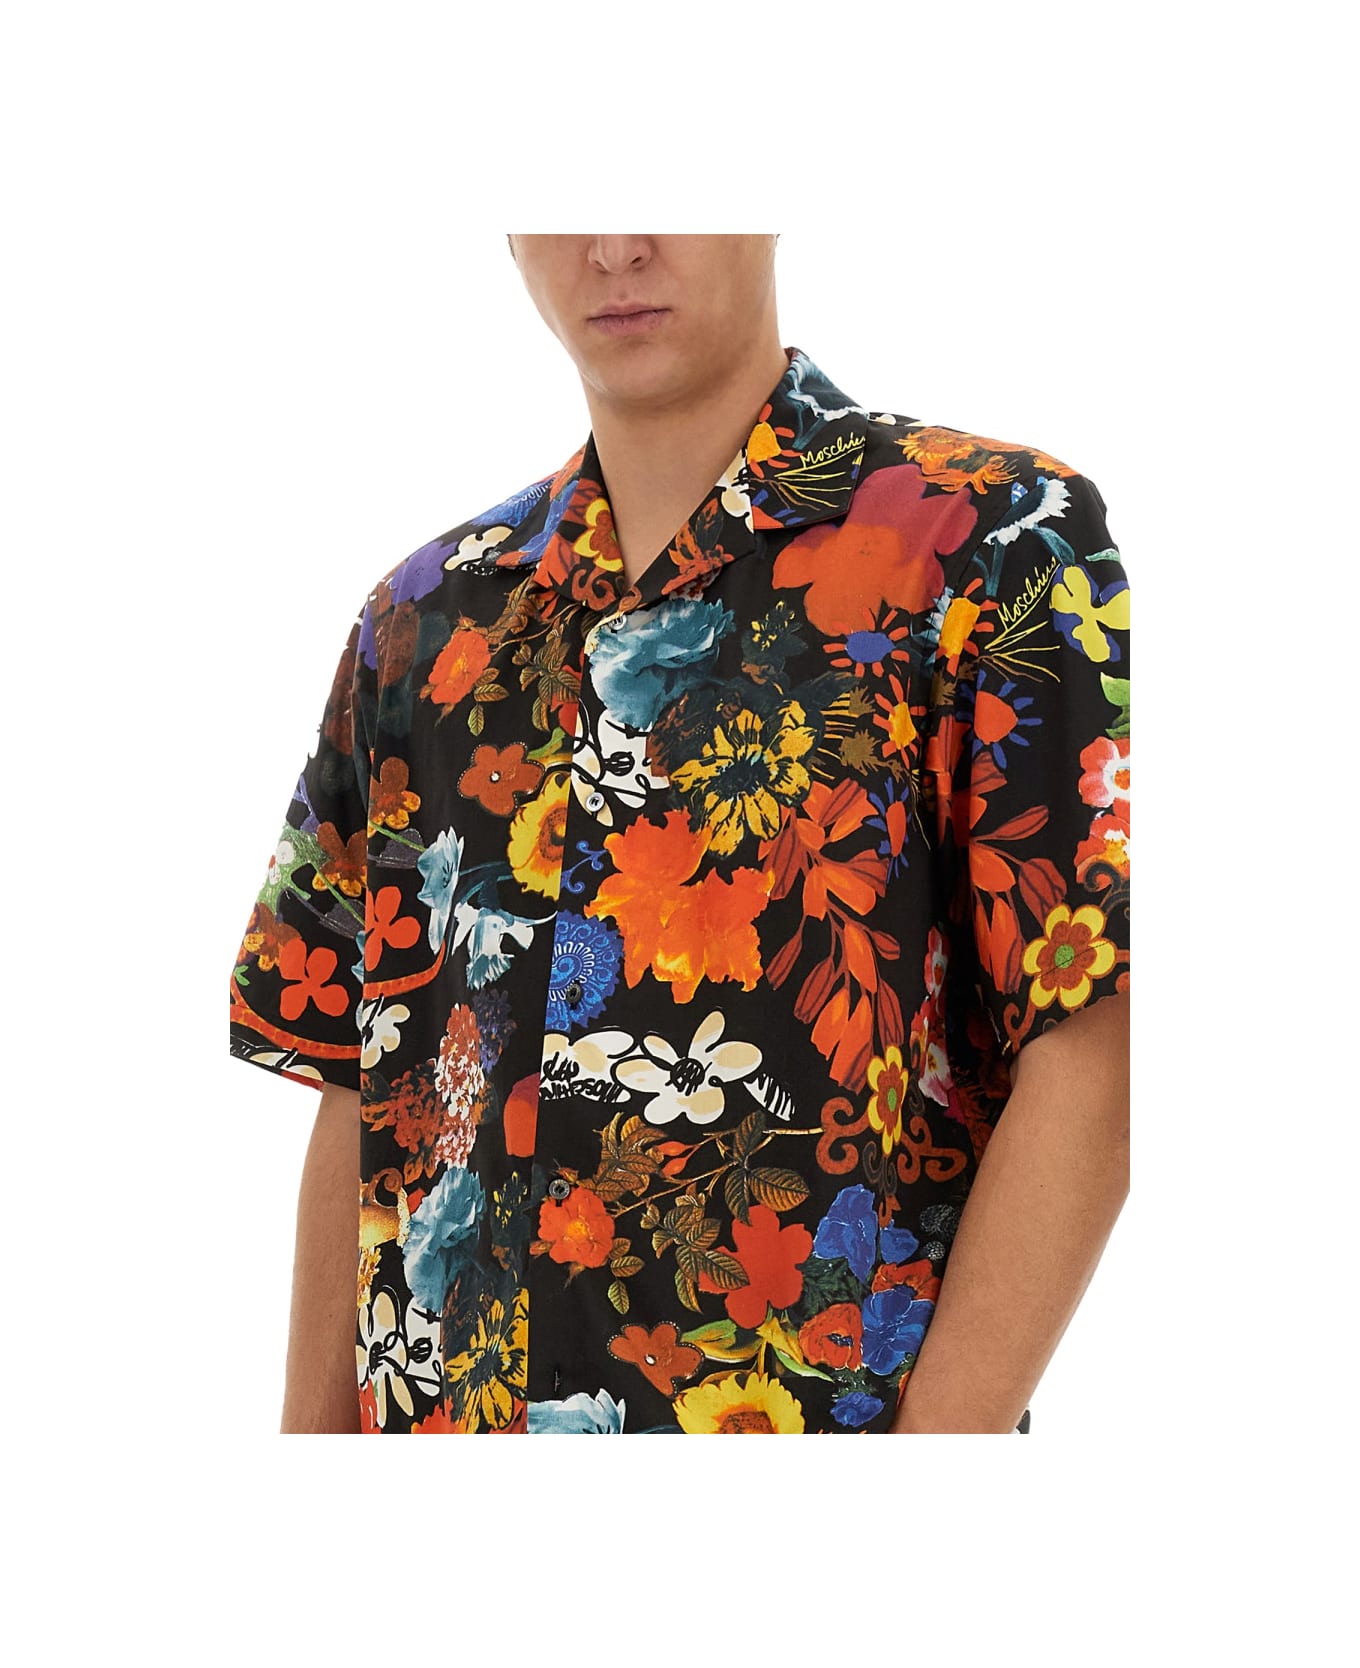 Moschino Shirt With Floral Pattern - MULTICOLOUR シャツ